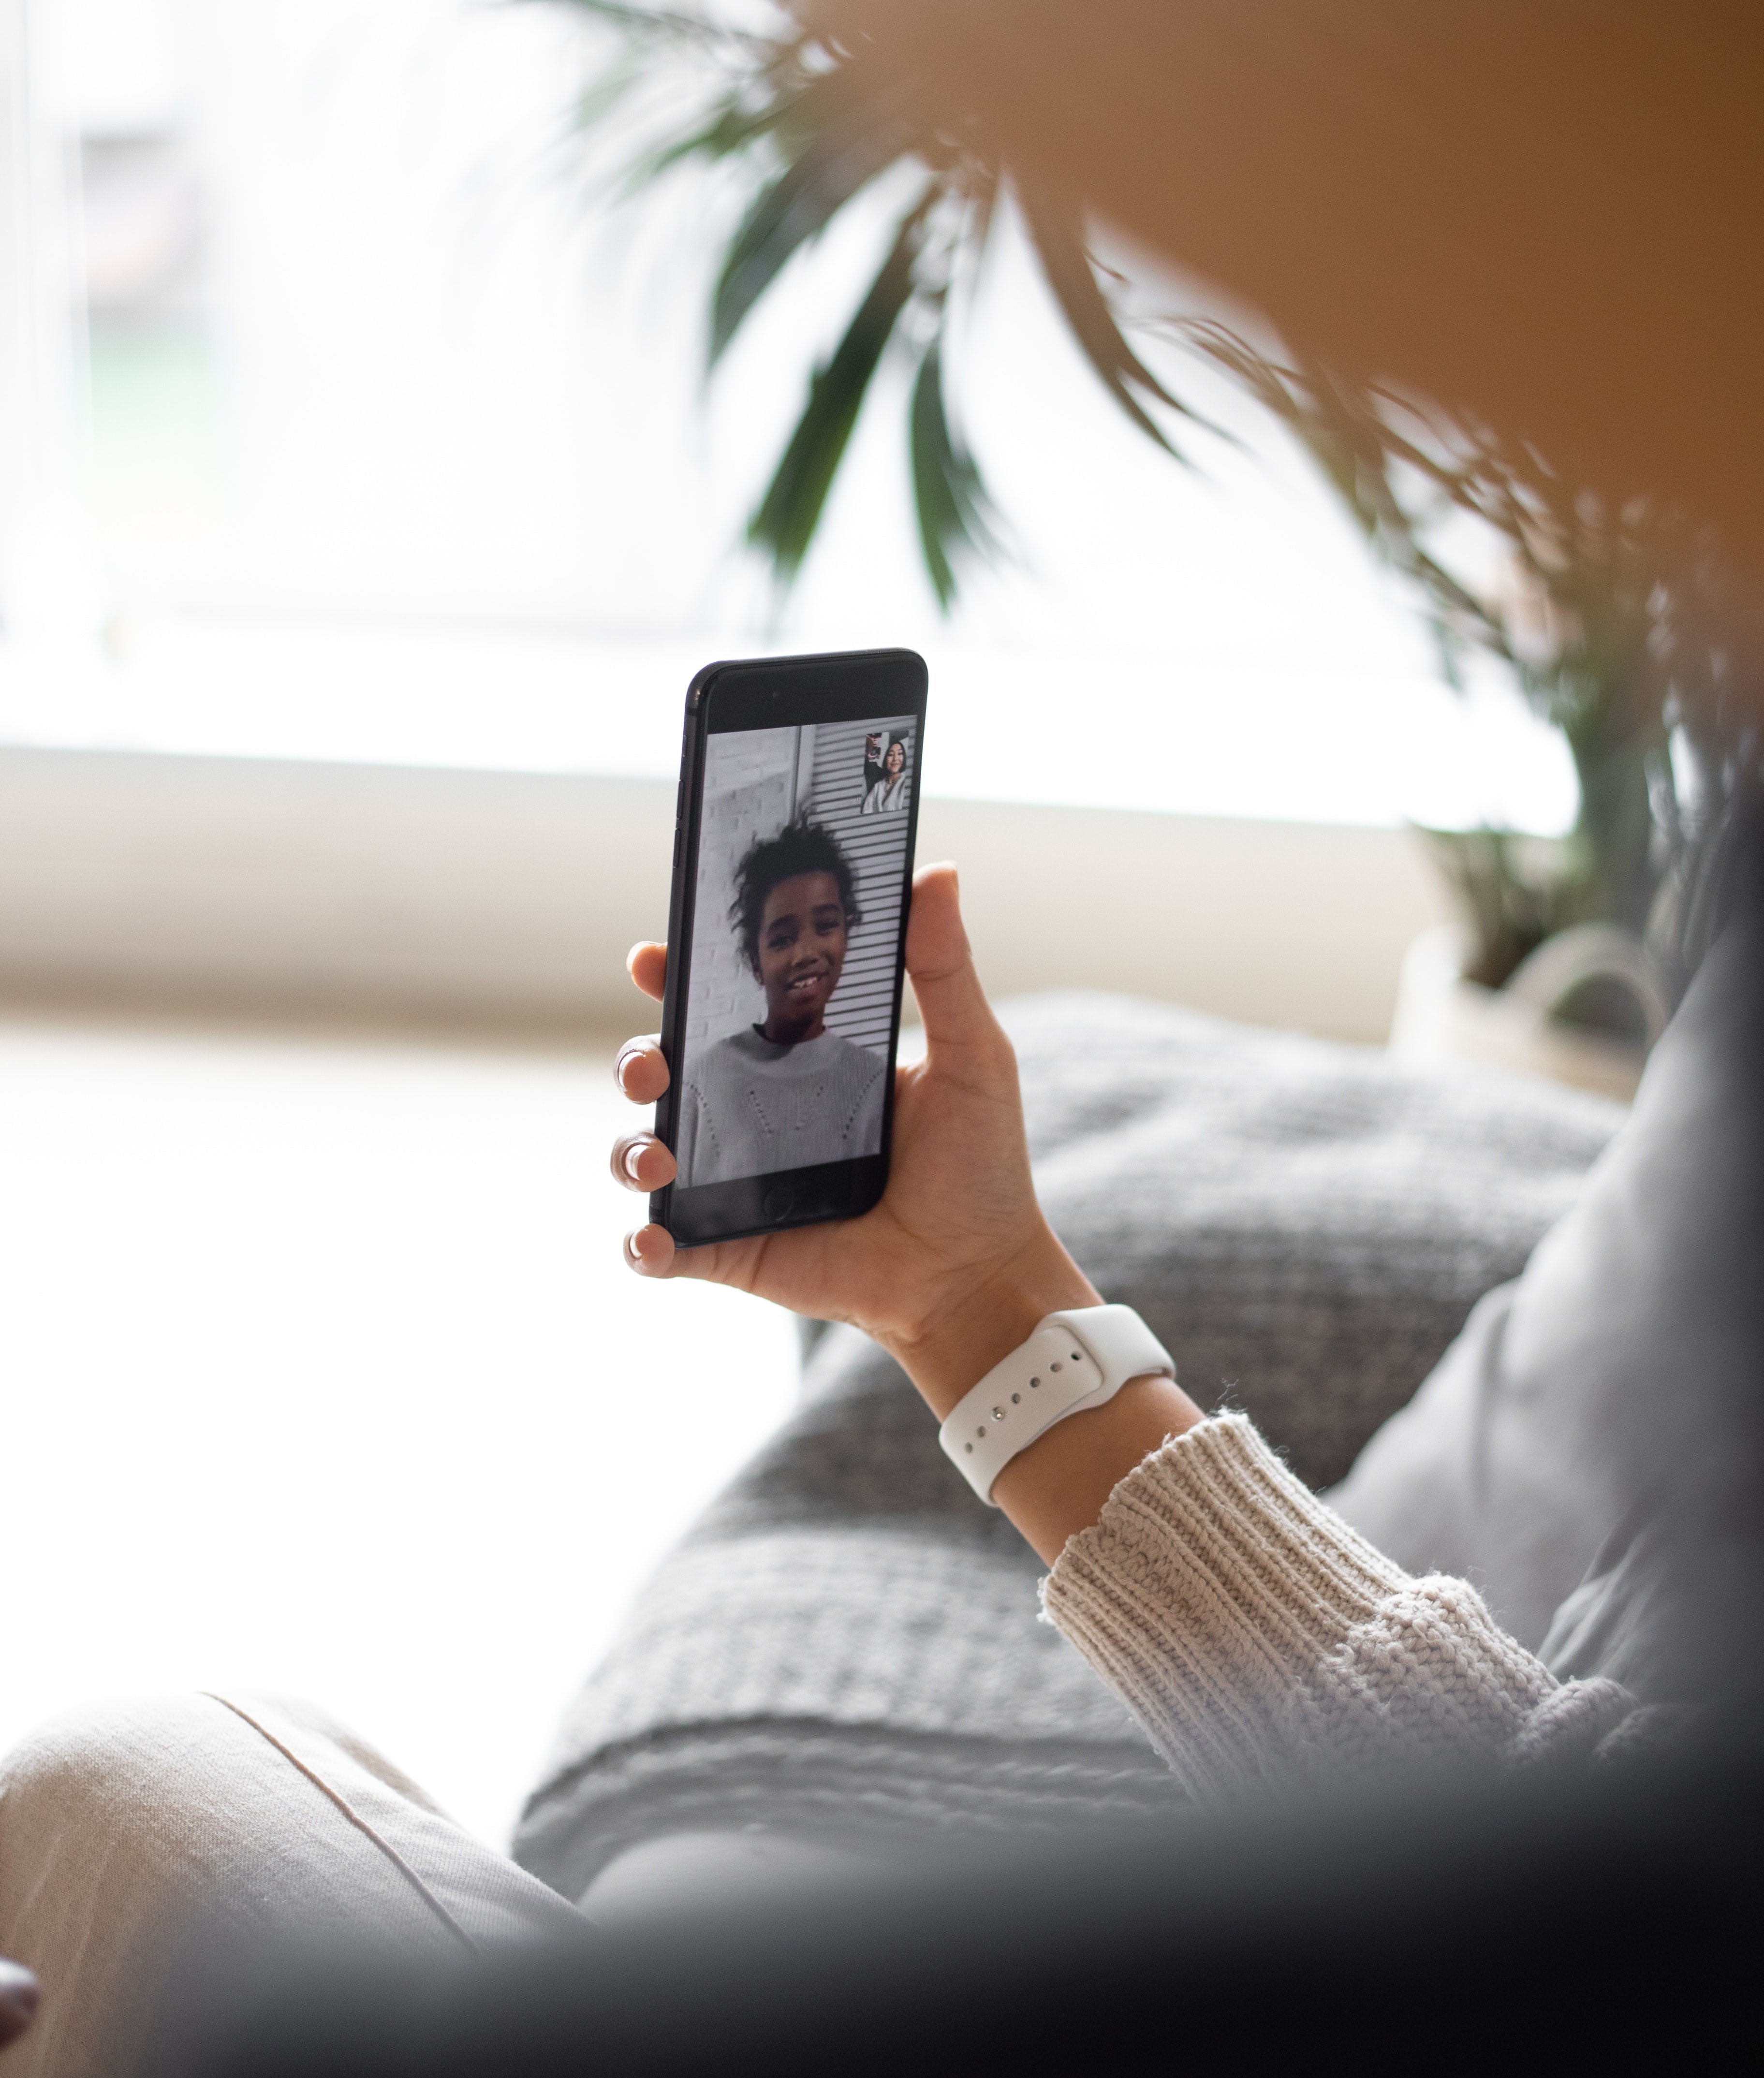 Two people on a video call: a hand holds up a cell phone, which shows the face of another person on the other end